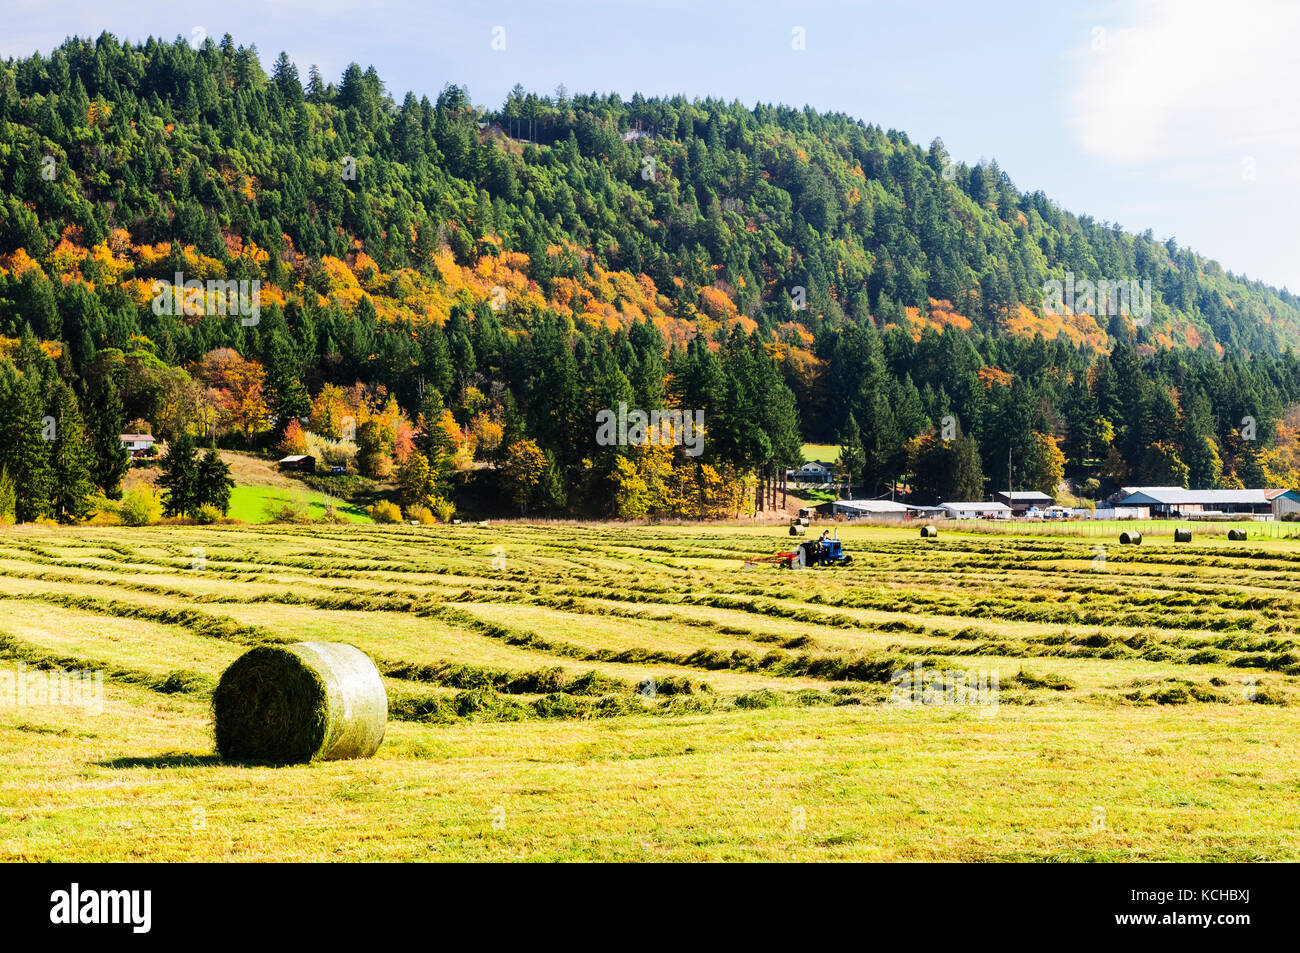 A tractor making hay bales in a field near Ladysmith, British Columbia. Stock Photo